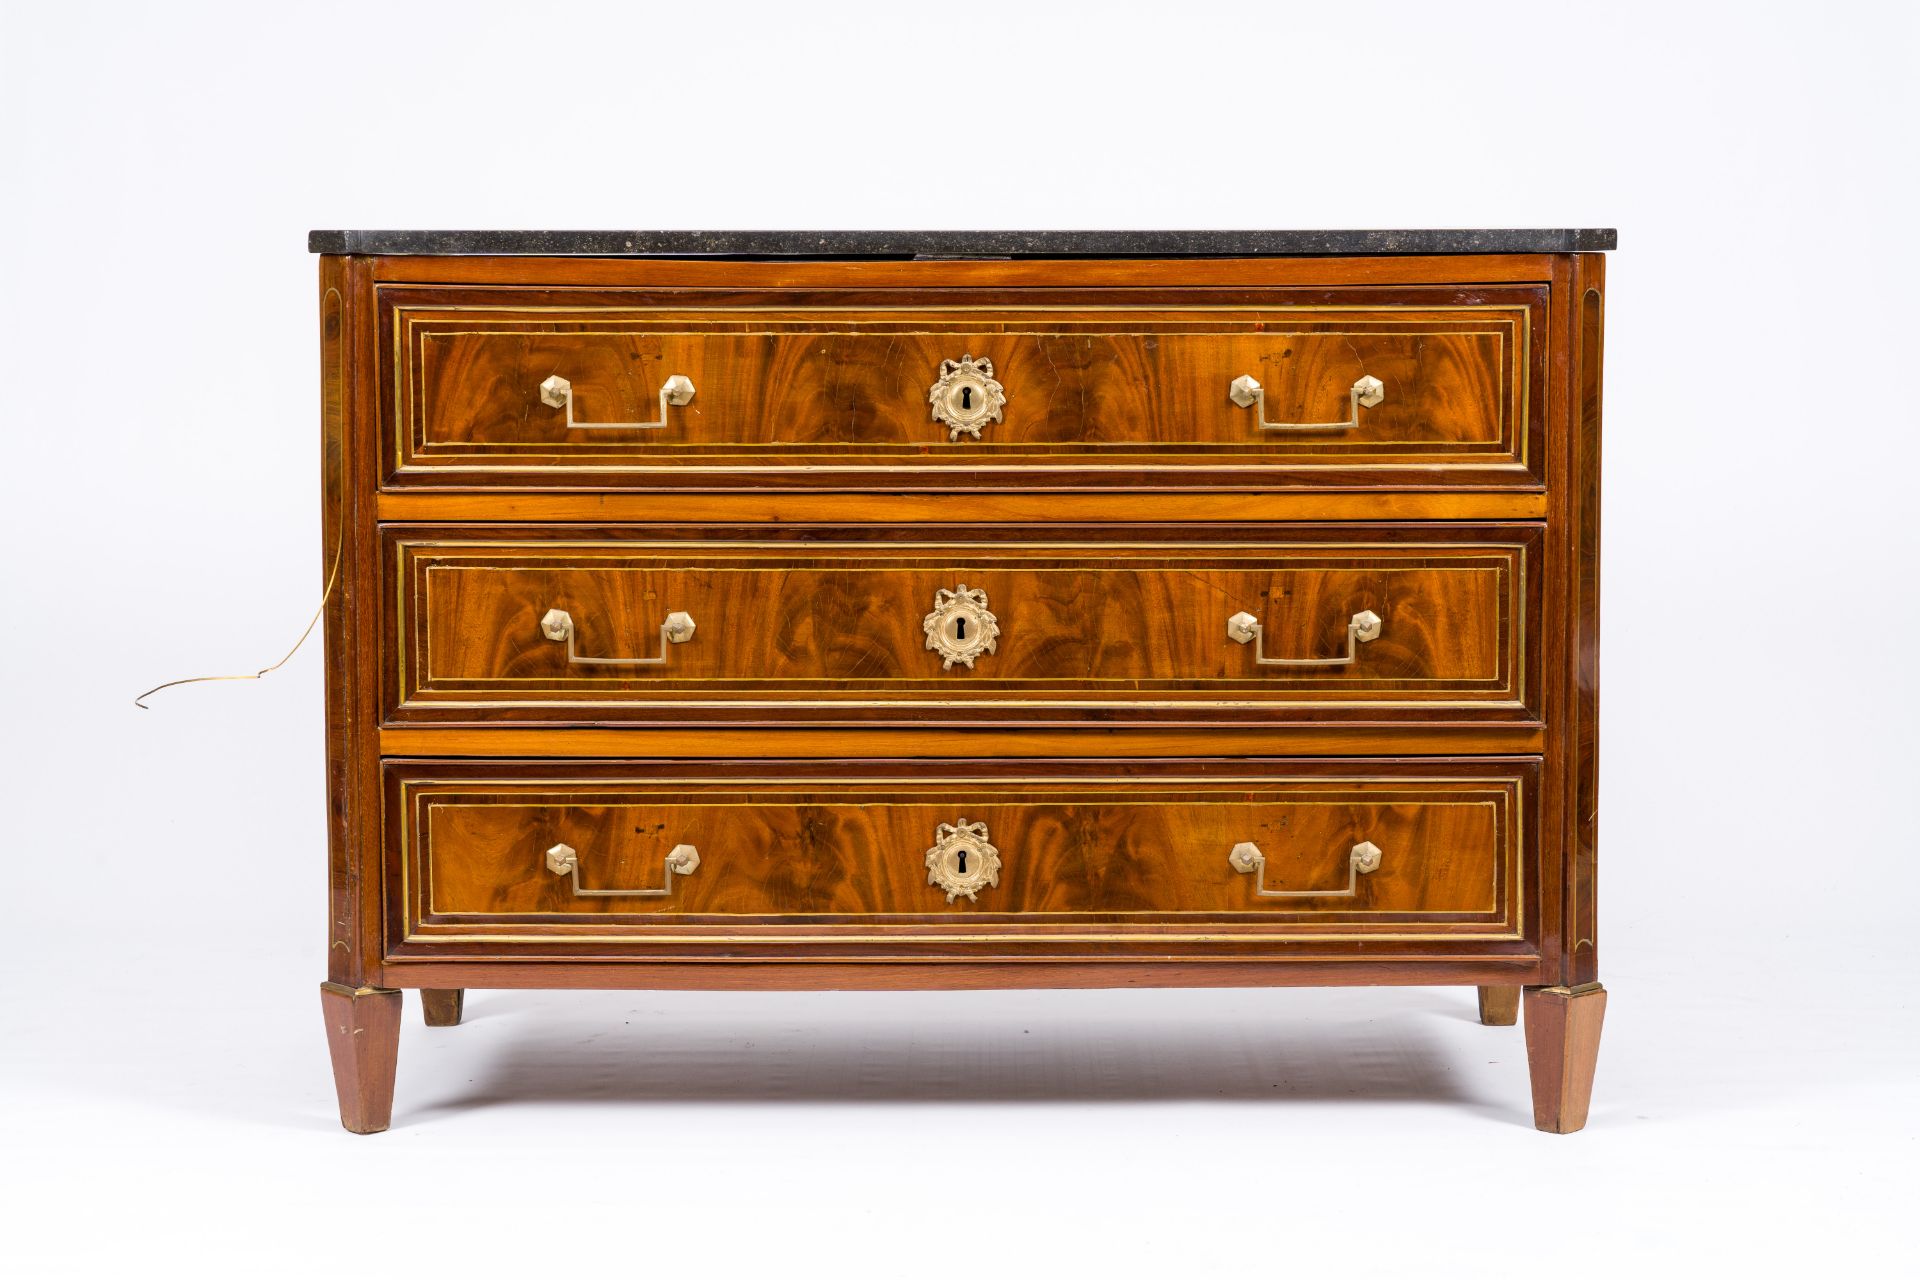 A French Neoclassical brass mounted wood chest of drawers with bluestone top, 19th/20th C. - Image 2 of 5